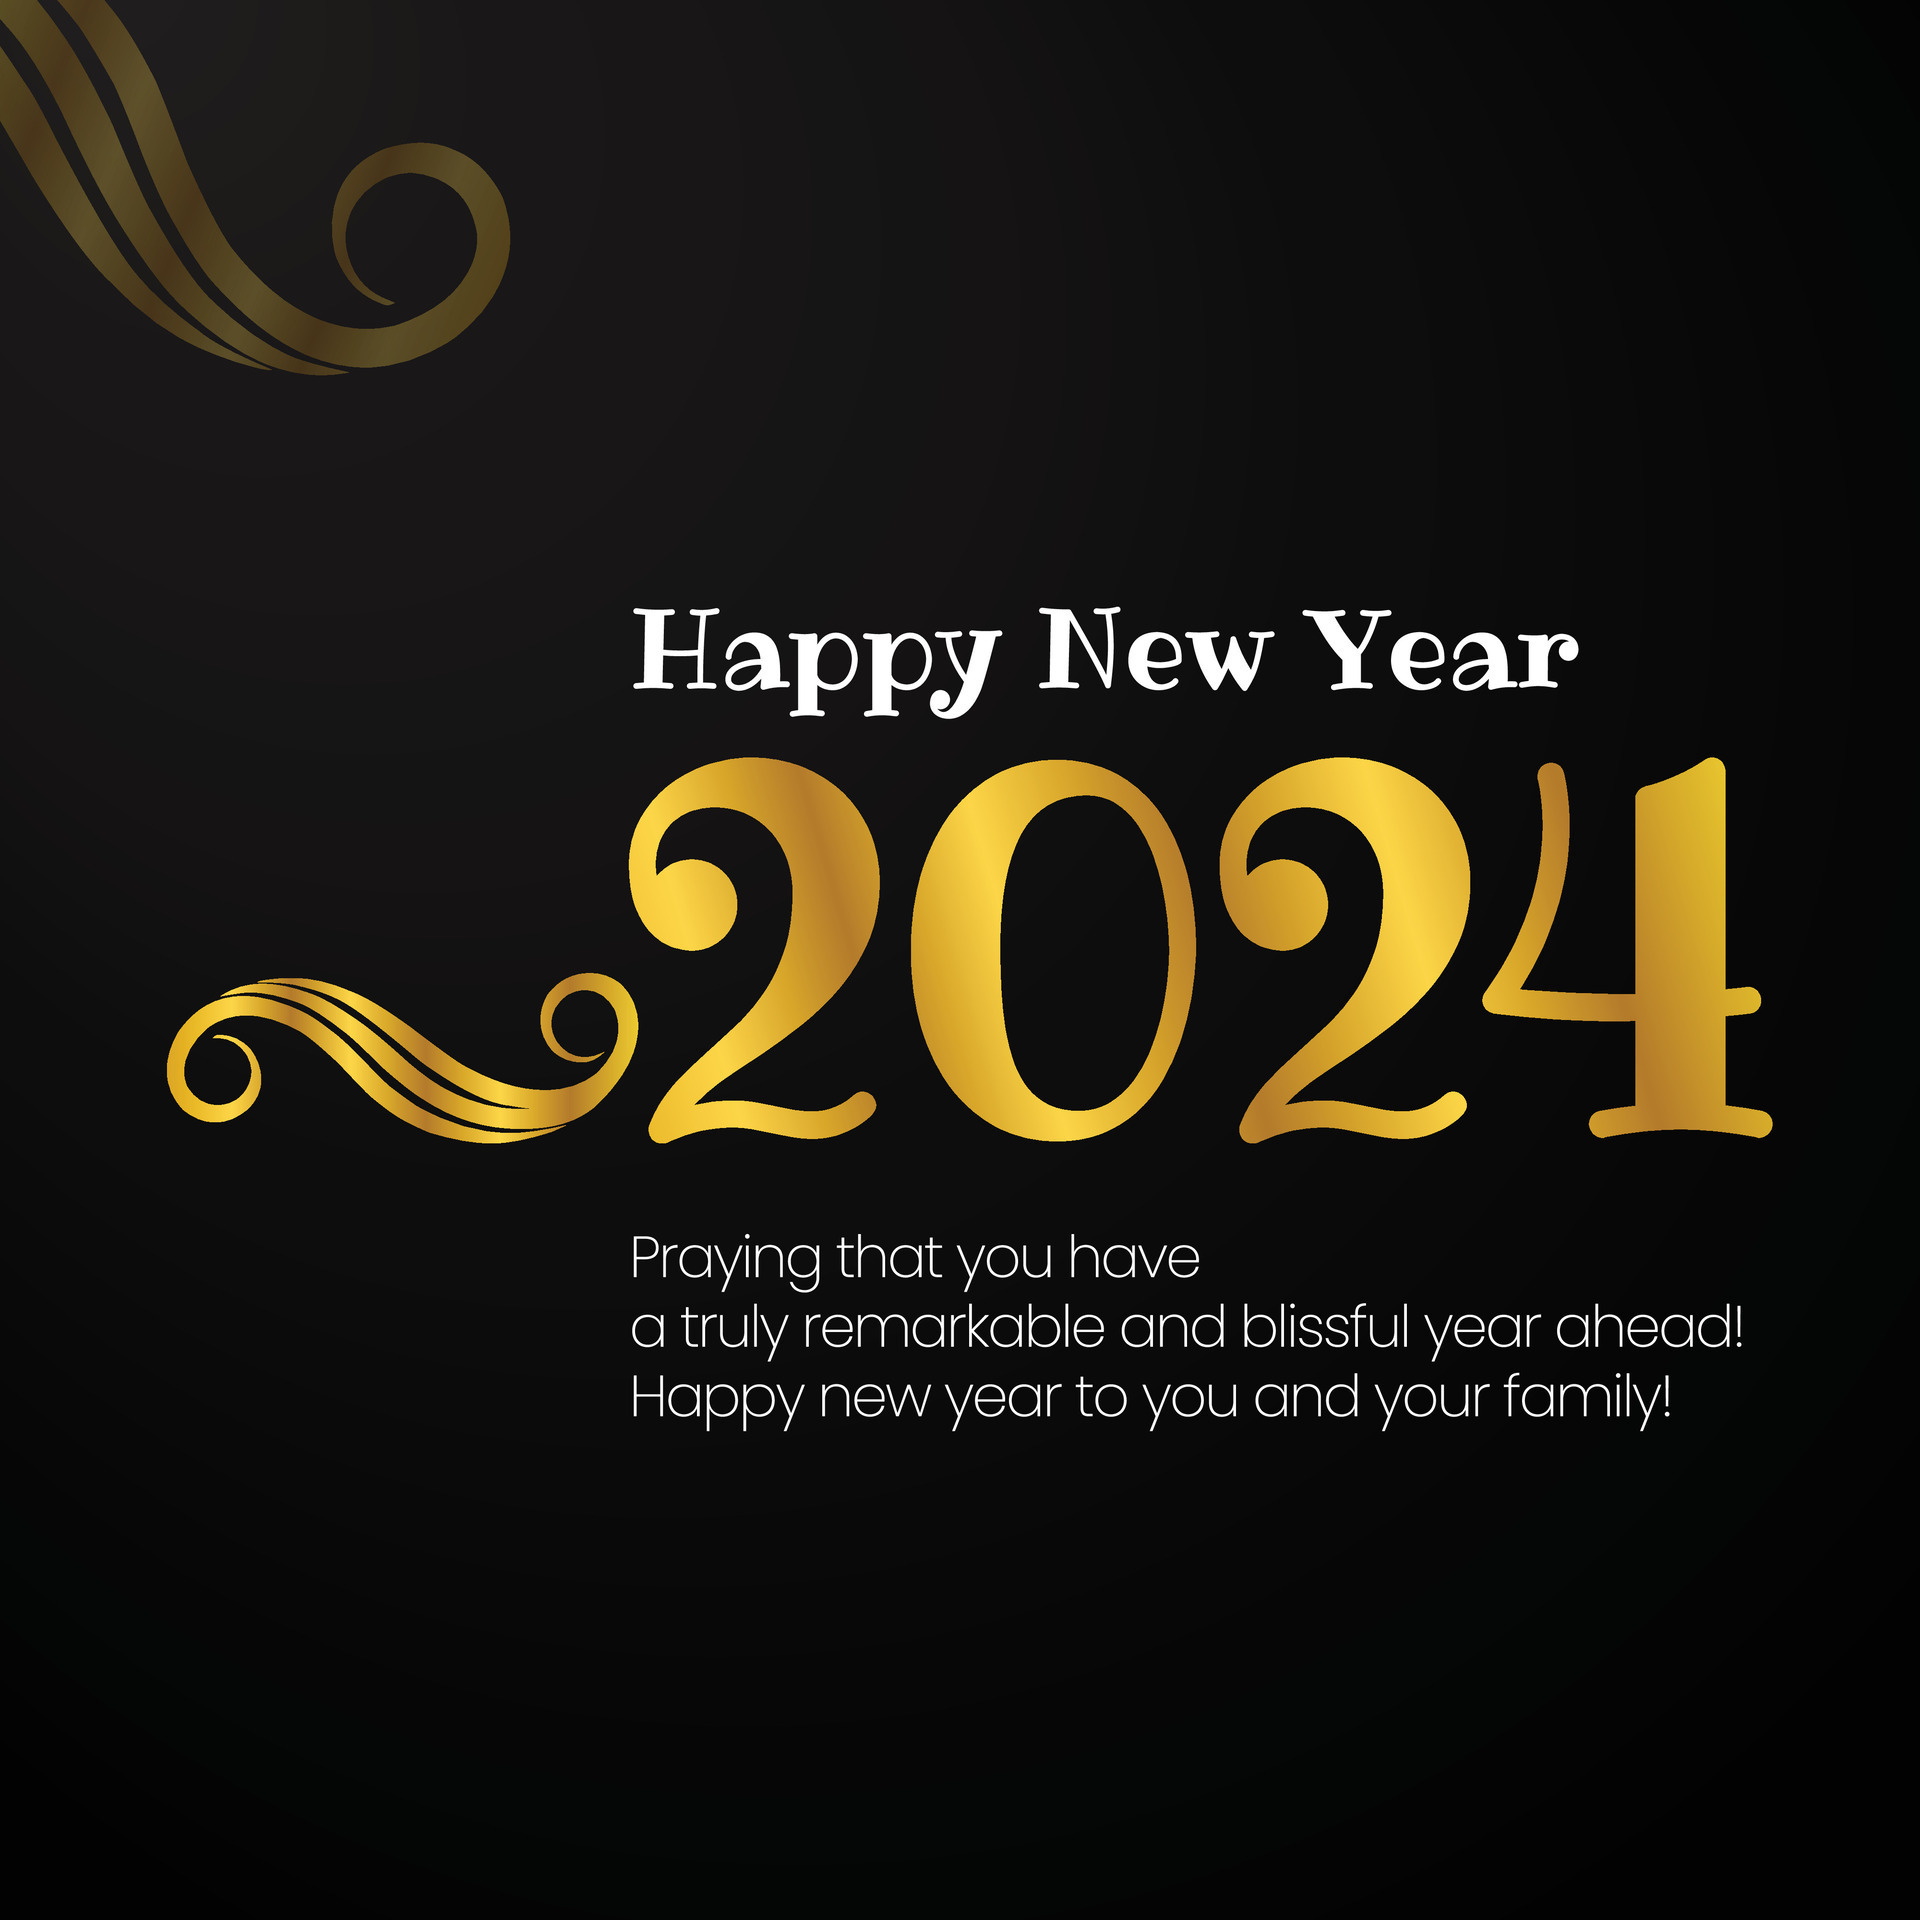 Happy new year 2024 design. Colorful premium vector design for poster